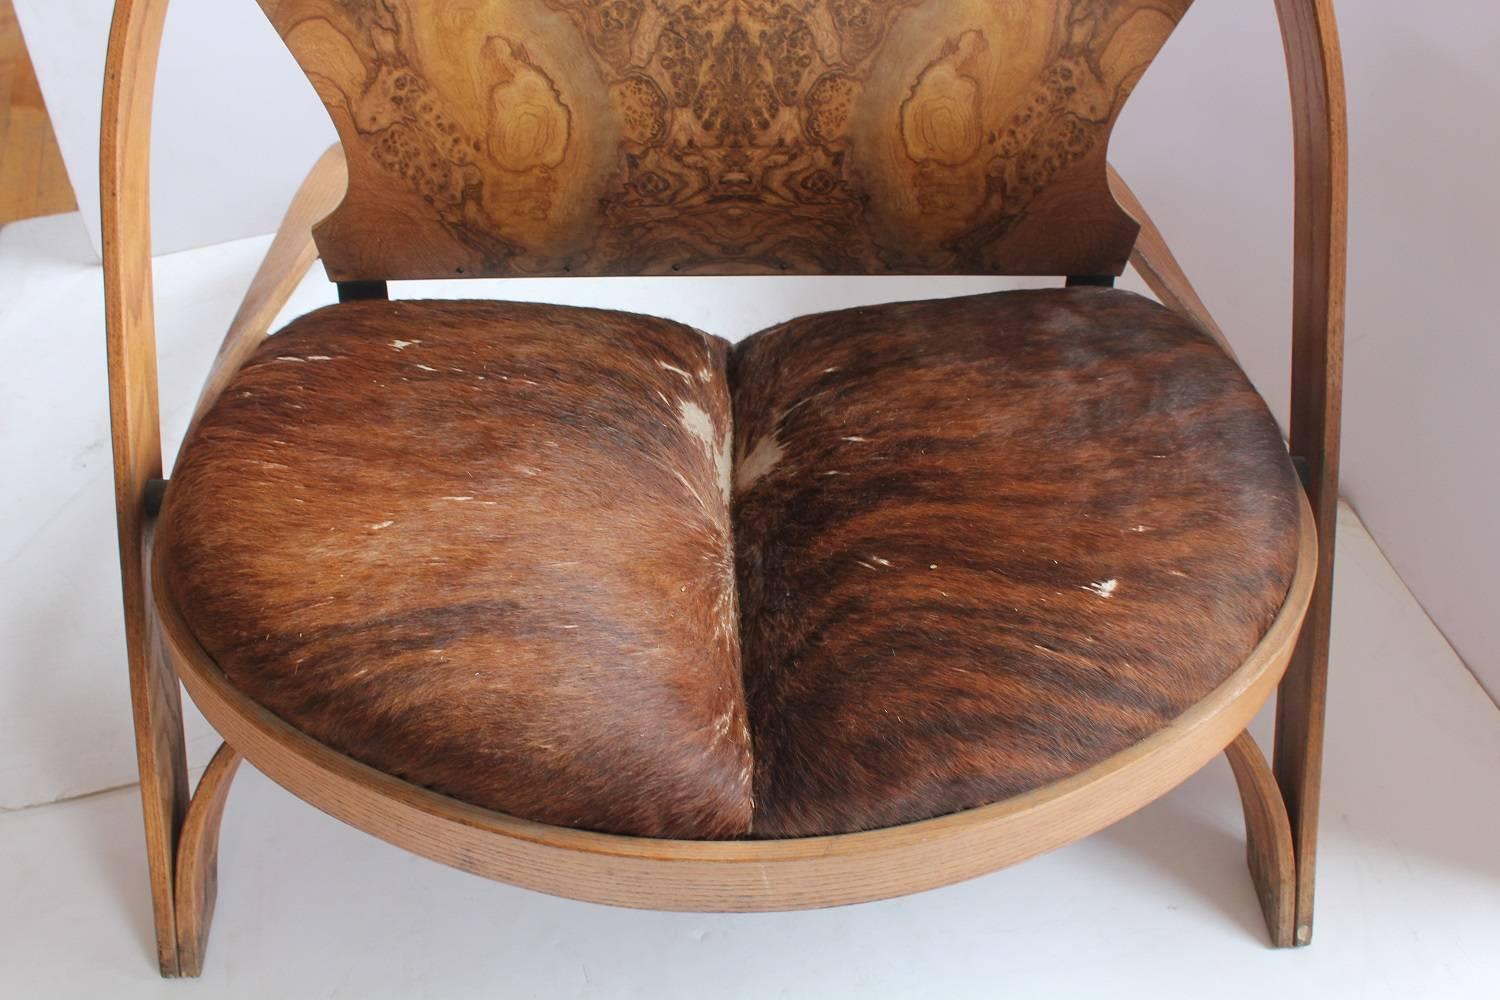 Spectacular chair by Richard Artschwager. It is signed, dated and numbered 30/100.